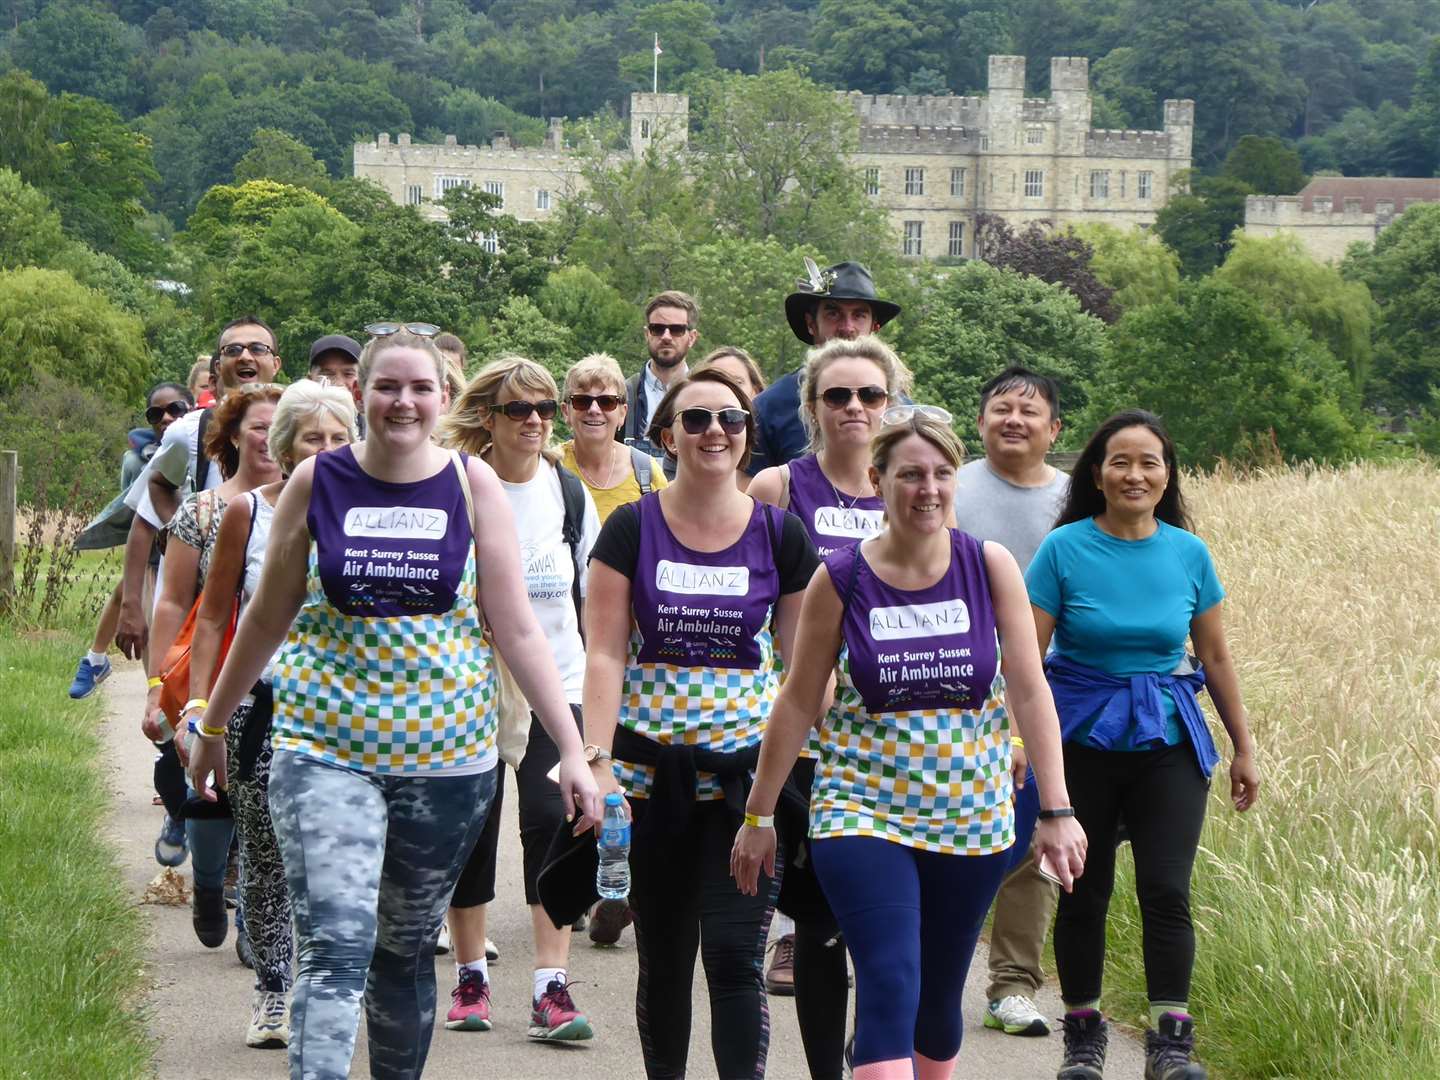 The KM Charity Walk links Mote House with Leeds Castle in Maidstone